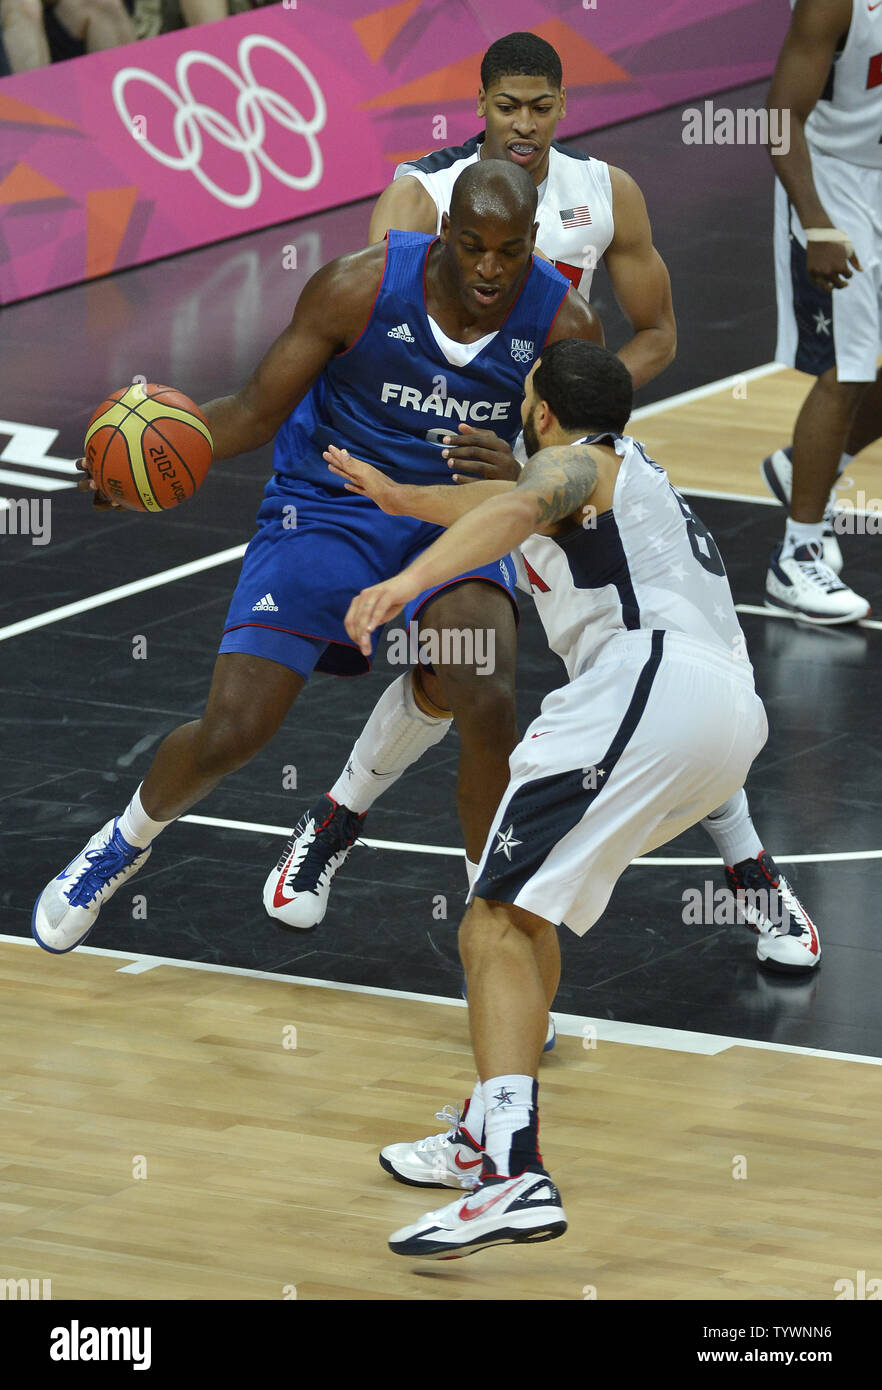 France's Ali Traore dribbles between the United States' Deron Williams, who also plays for the NBA's Brooklyn Nets (front) and Anthony Davis (rear), who also plays for the New Orleans Hornets during the United States-France Men's Basketball Preliminary competition at the 2012 Summer Olympics, July 29, 2012, in London, England.              UPI/Mike Theiler Stock Photo